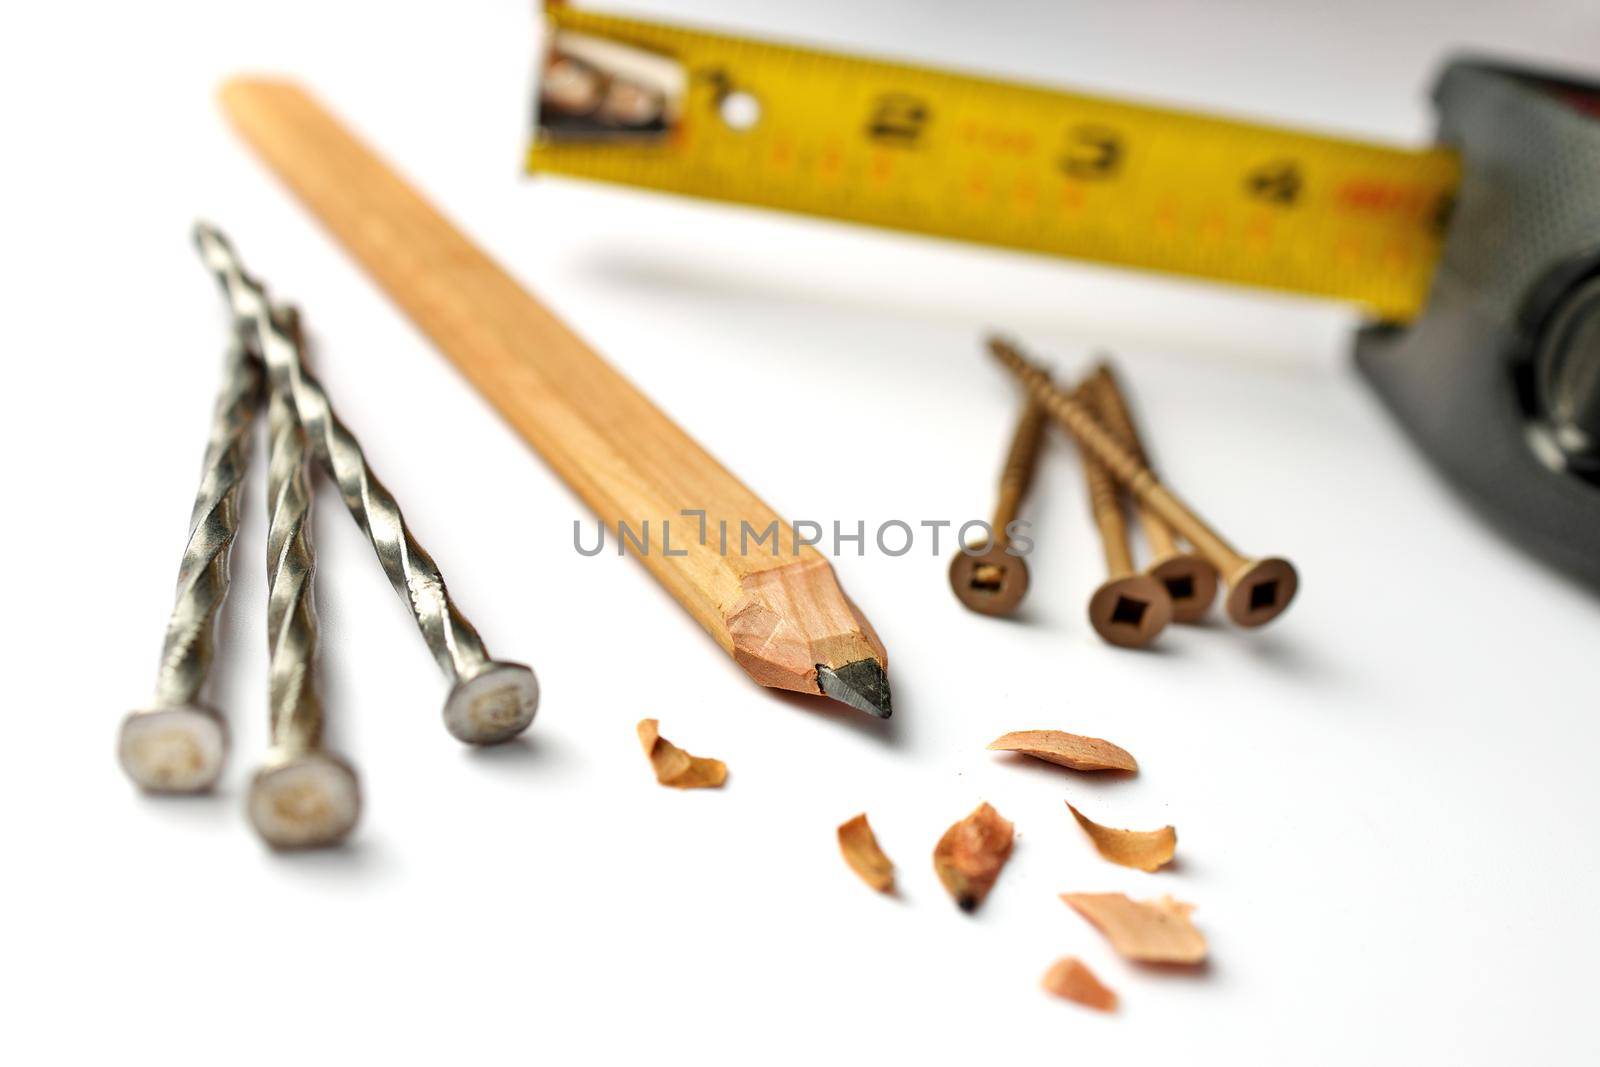 Carpenter's Pencil with Sharpening Shavings, Tape Measure, Framing Nails and Deck Screws by markvandam